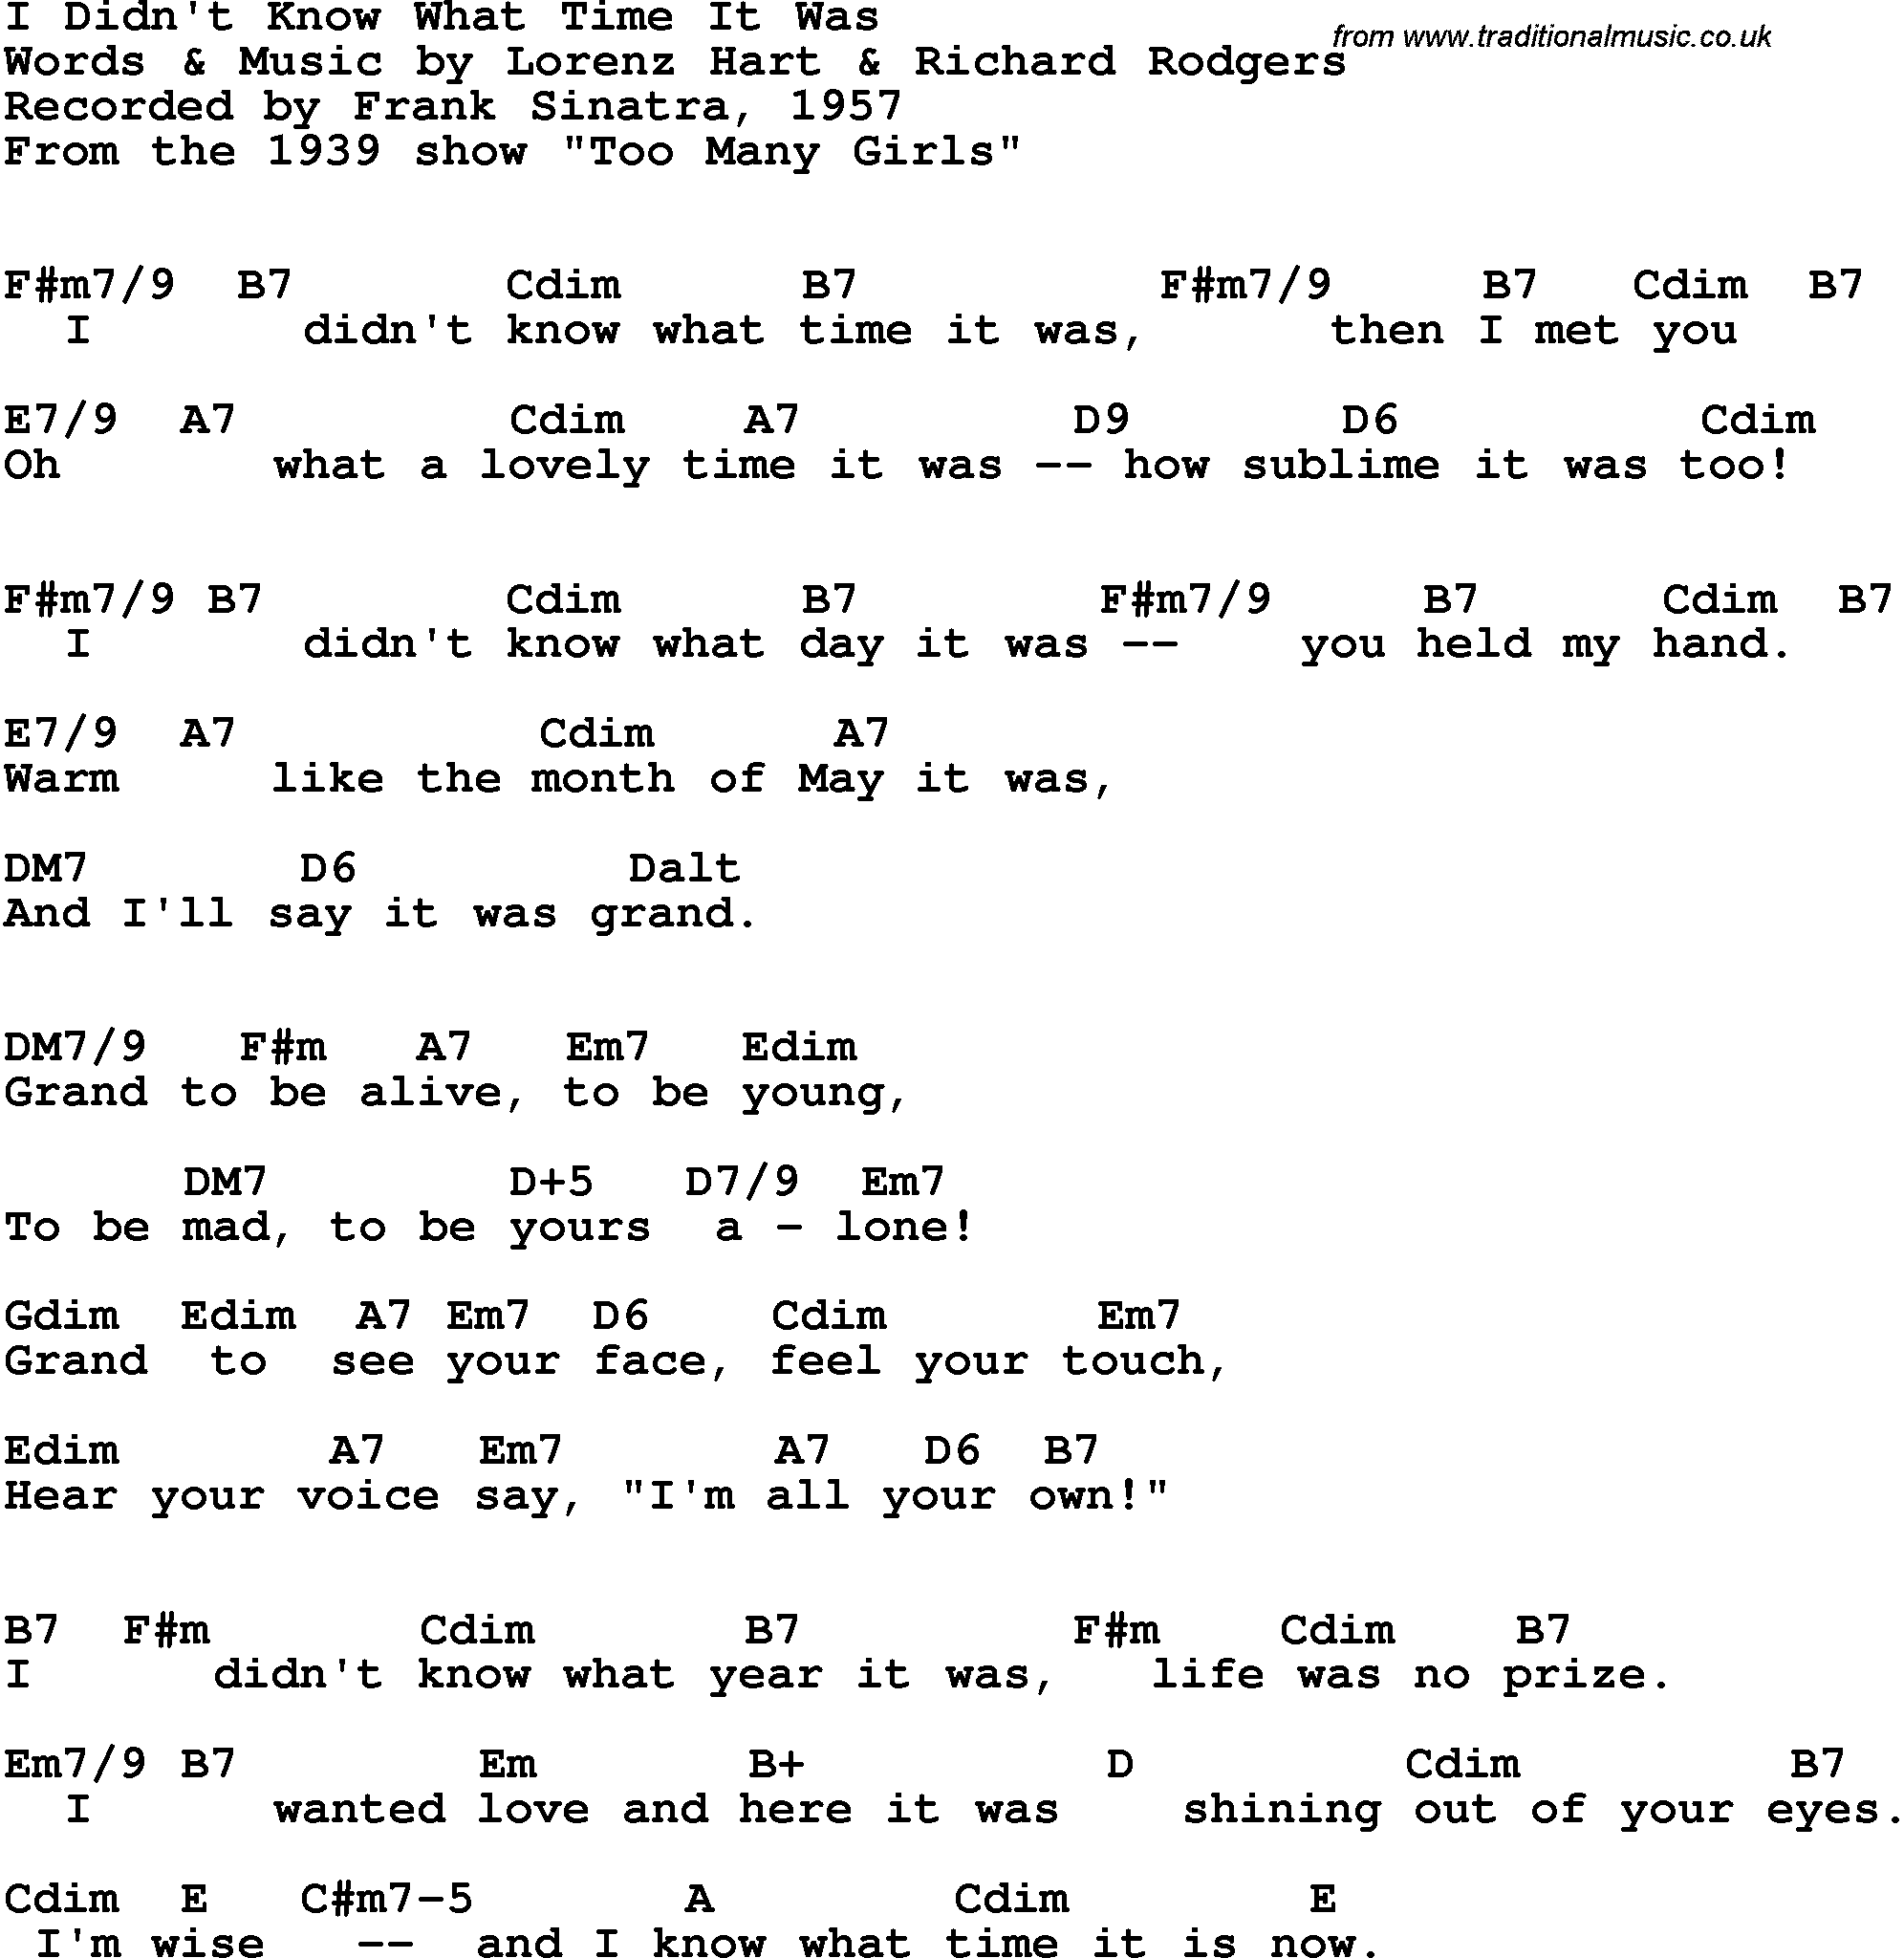 Song Lyrics with guitar chords for I Didn't Know What Time It Was - Frank Sinatra, 1957